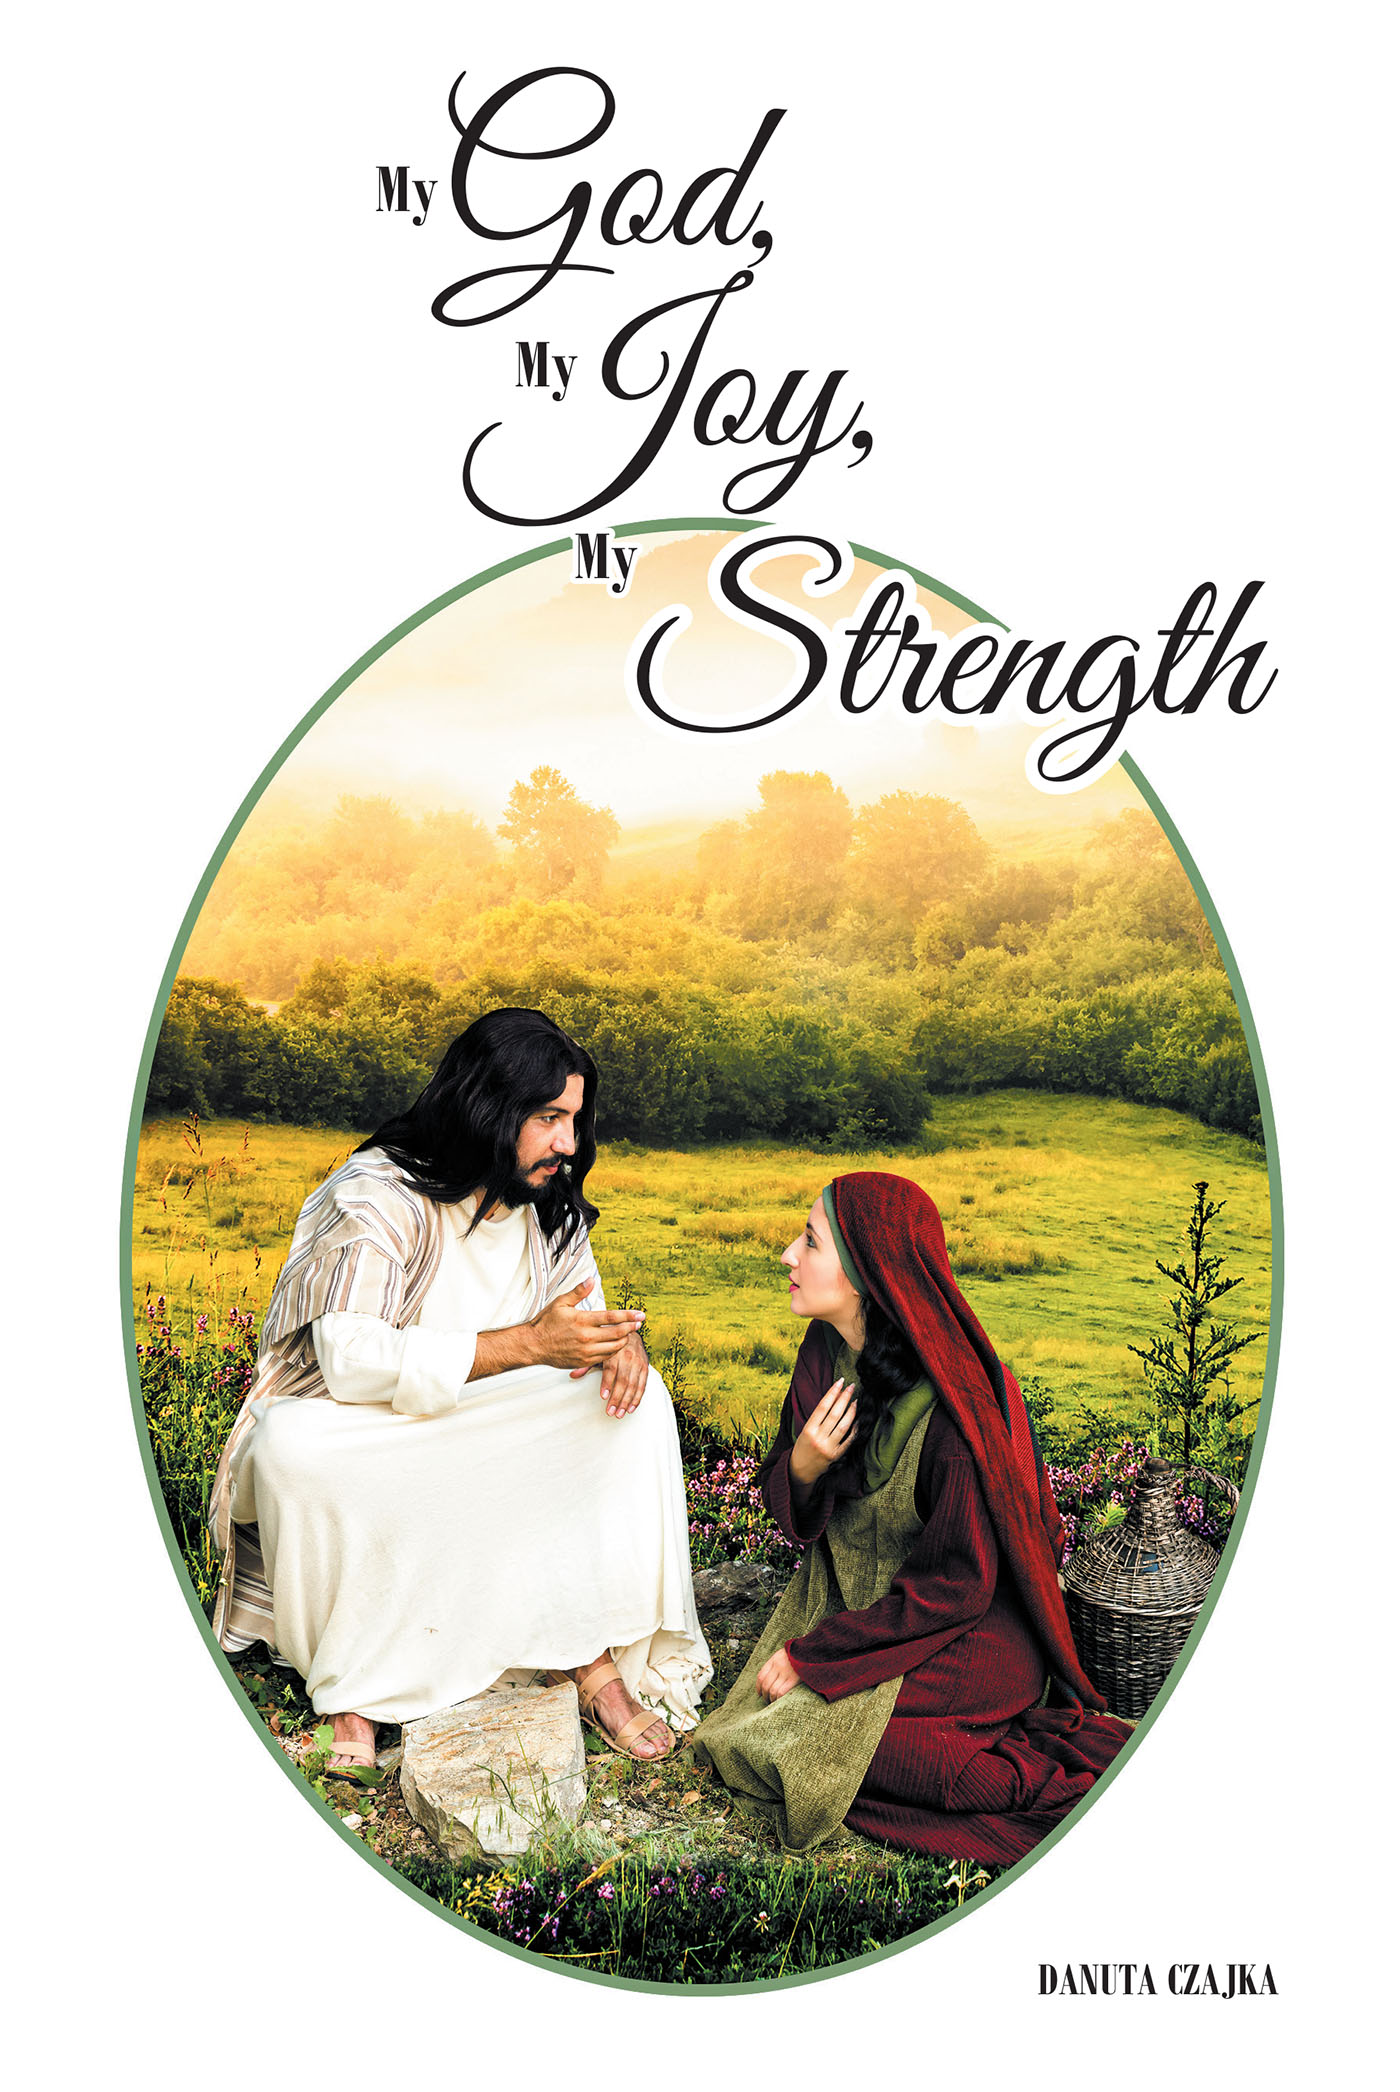 Author Danuta Czajkas New Book, My God, My Joy, My Strength is an Enchanting Collection of Faith Filled Poems Composed Through Life Experiences Newswire